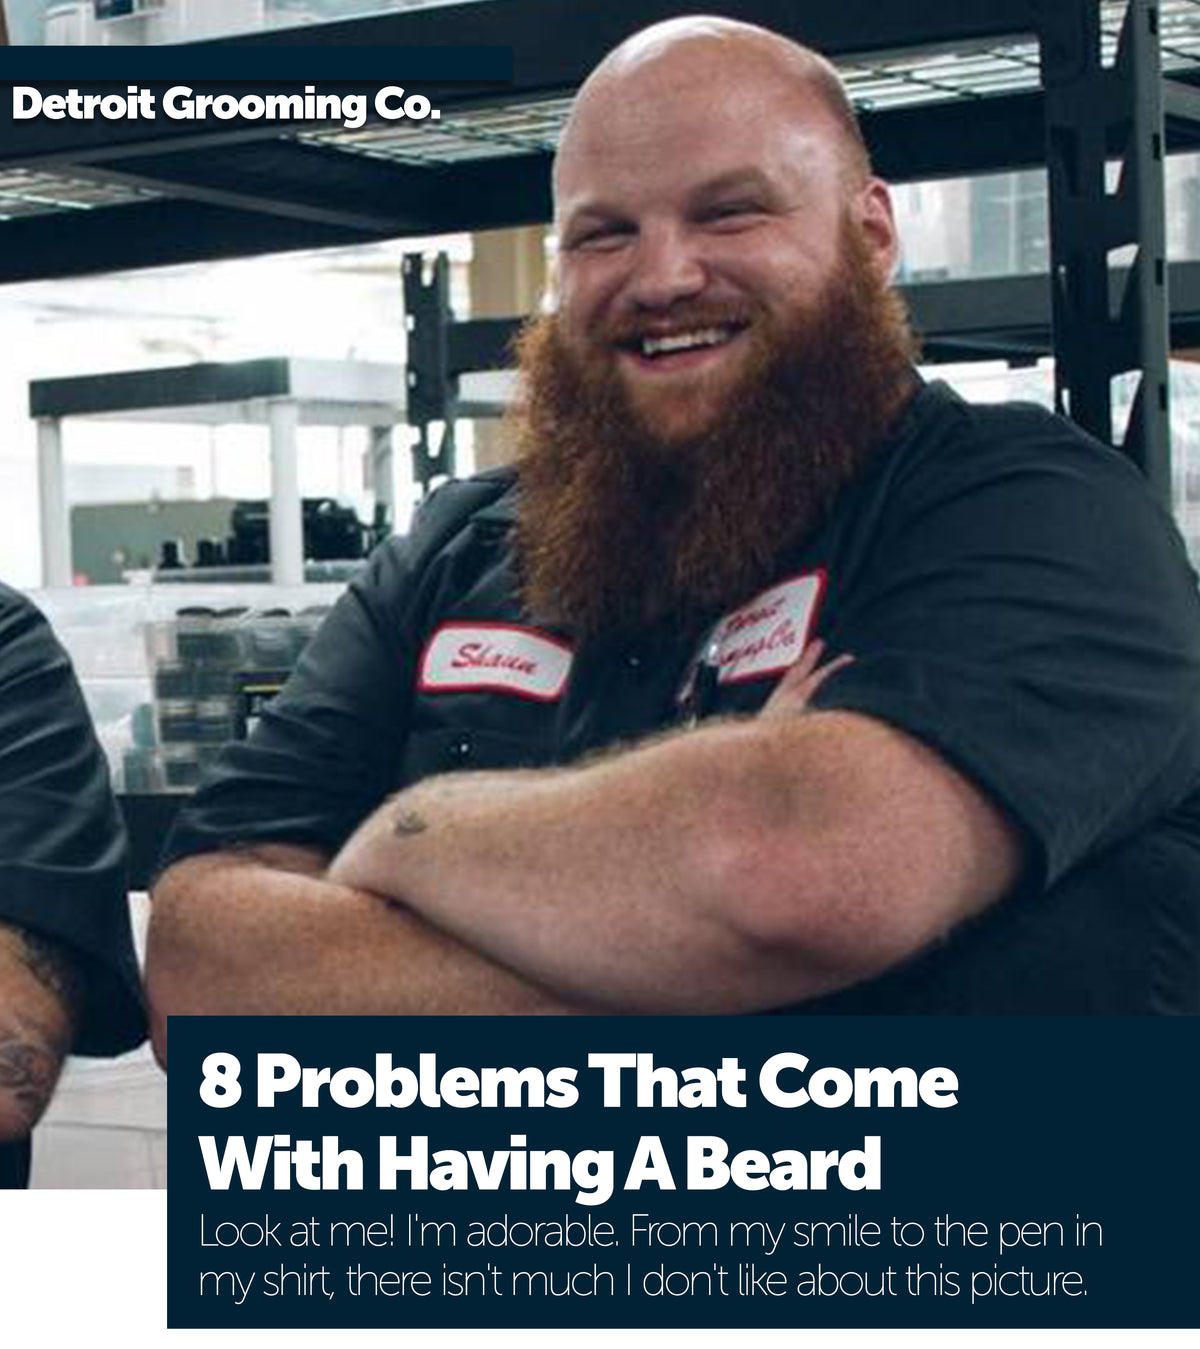 8 Problems that Come with Having a Beard